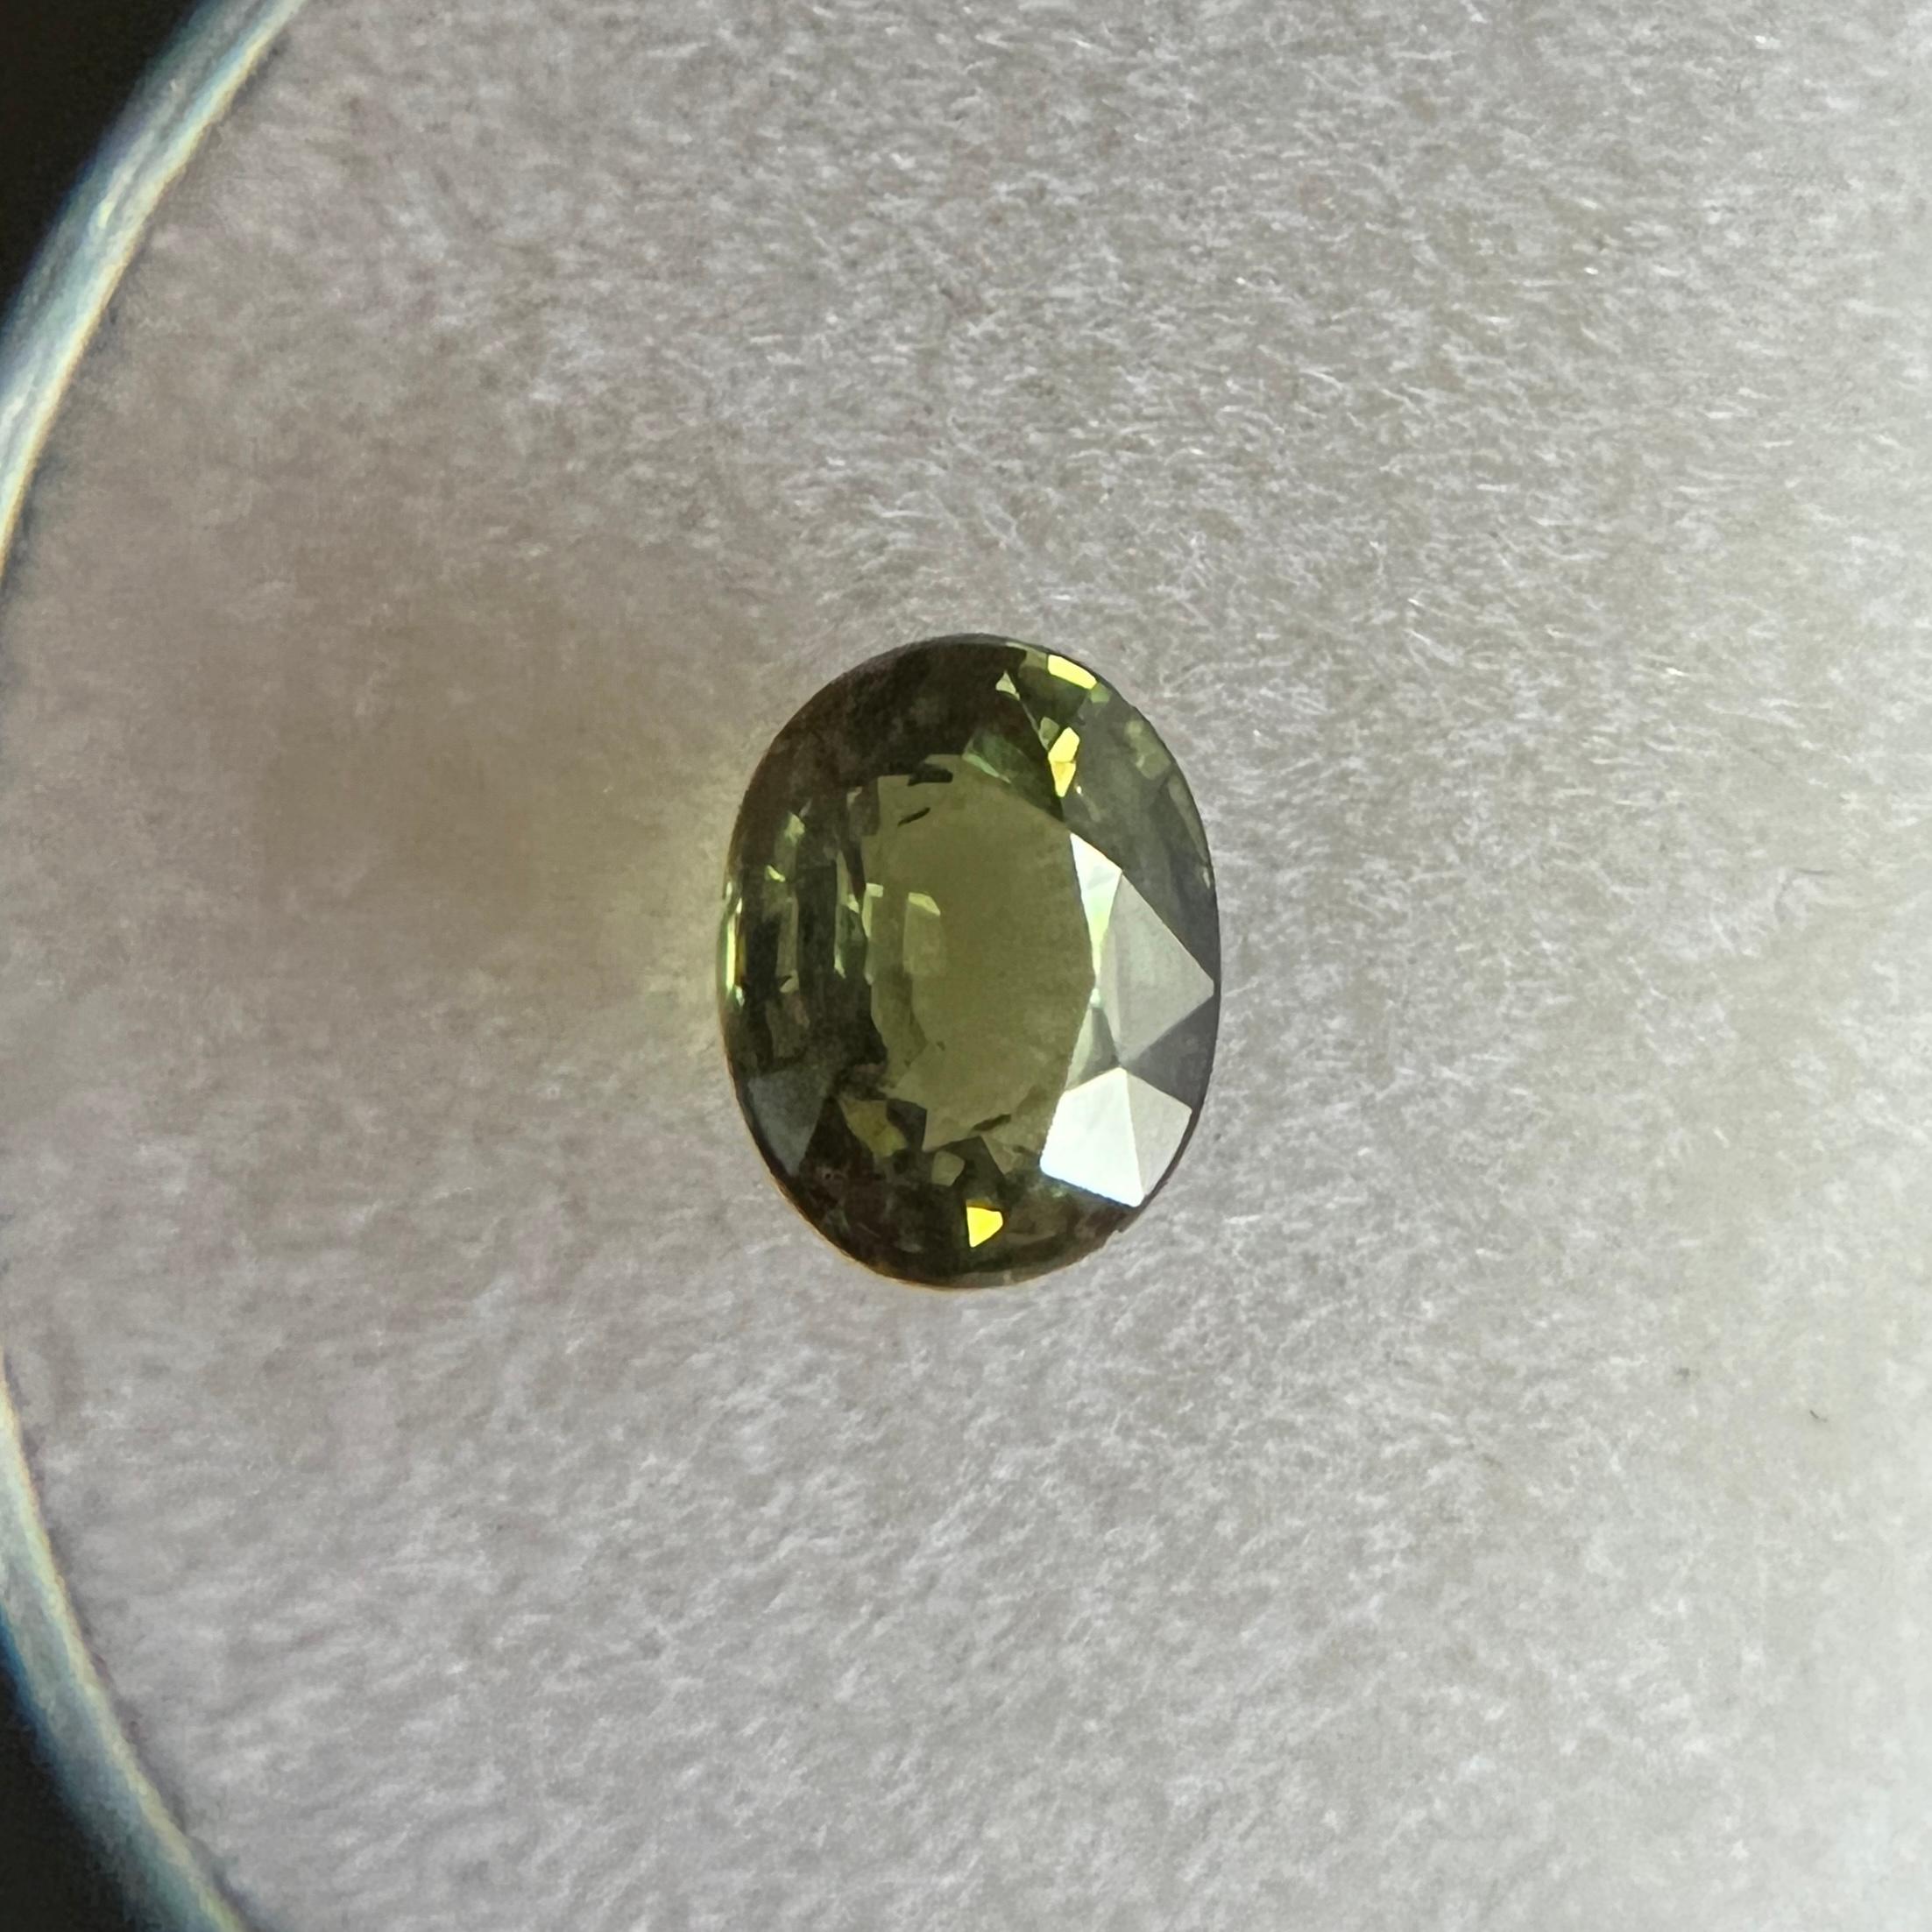 Fine Natural Yellow Green Sapphire Gemstone.

0.94 Carat with a beautiful vivid green yellow colour and excellent clarity, a very clean stone.

Also has an excellent oval cut and ideal polish to show great shine and colour, would look lovely in